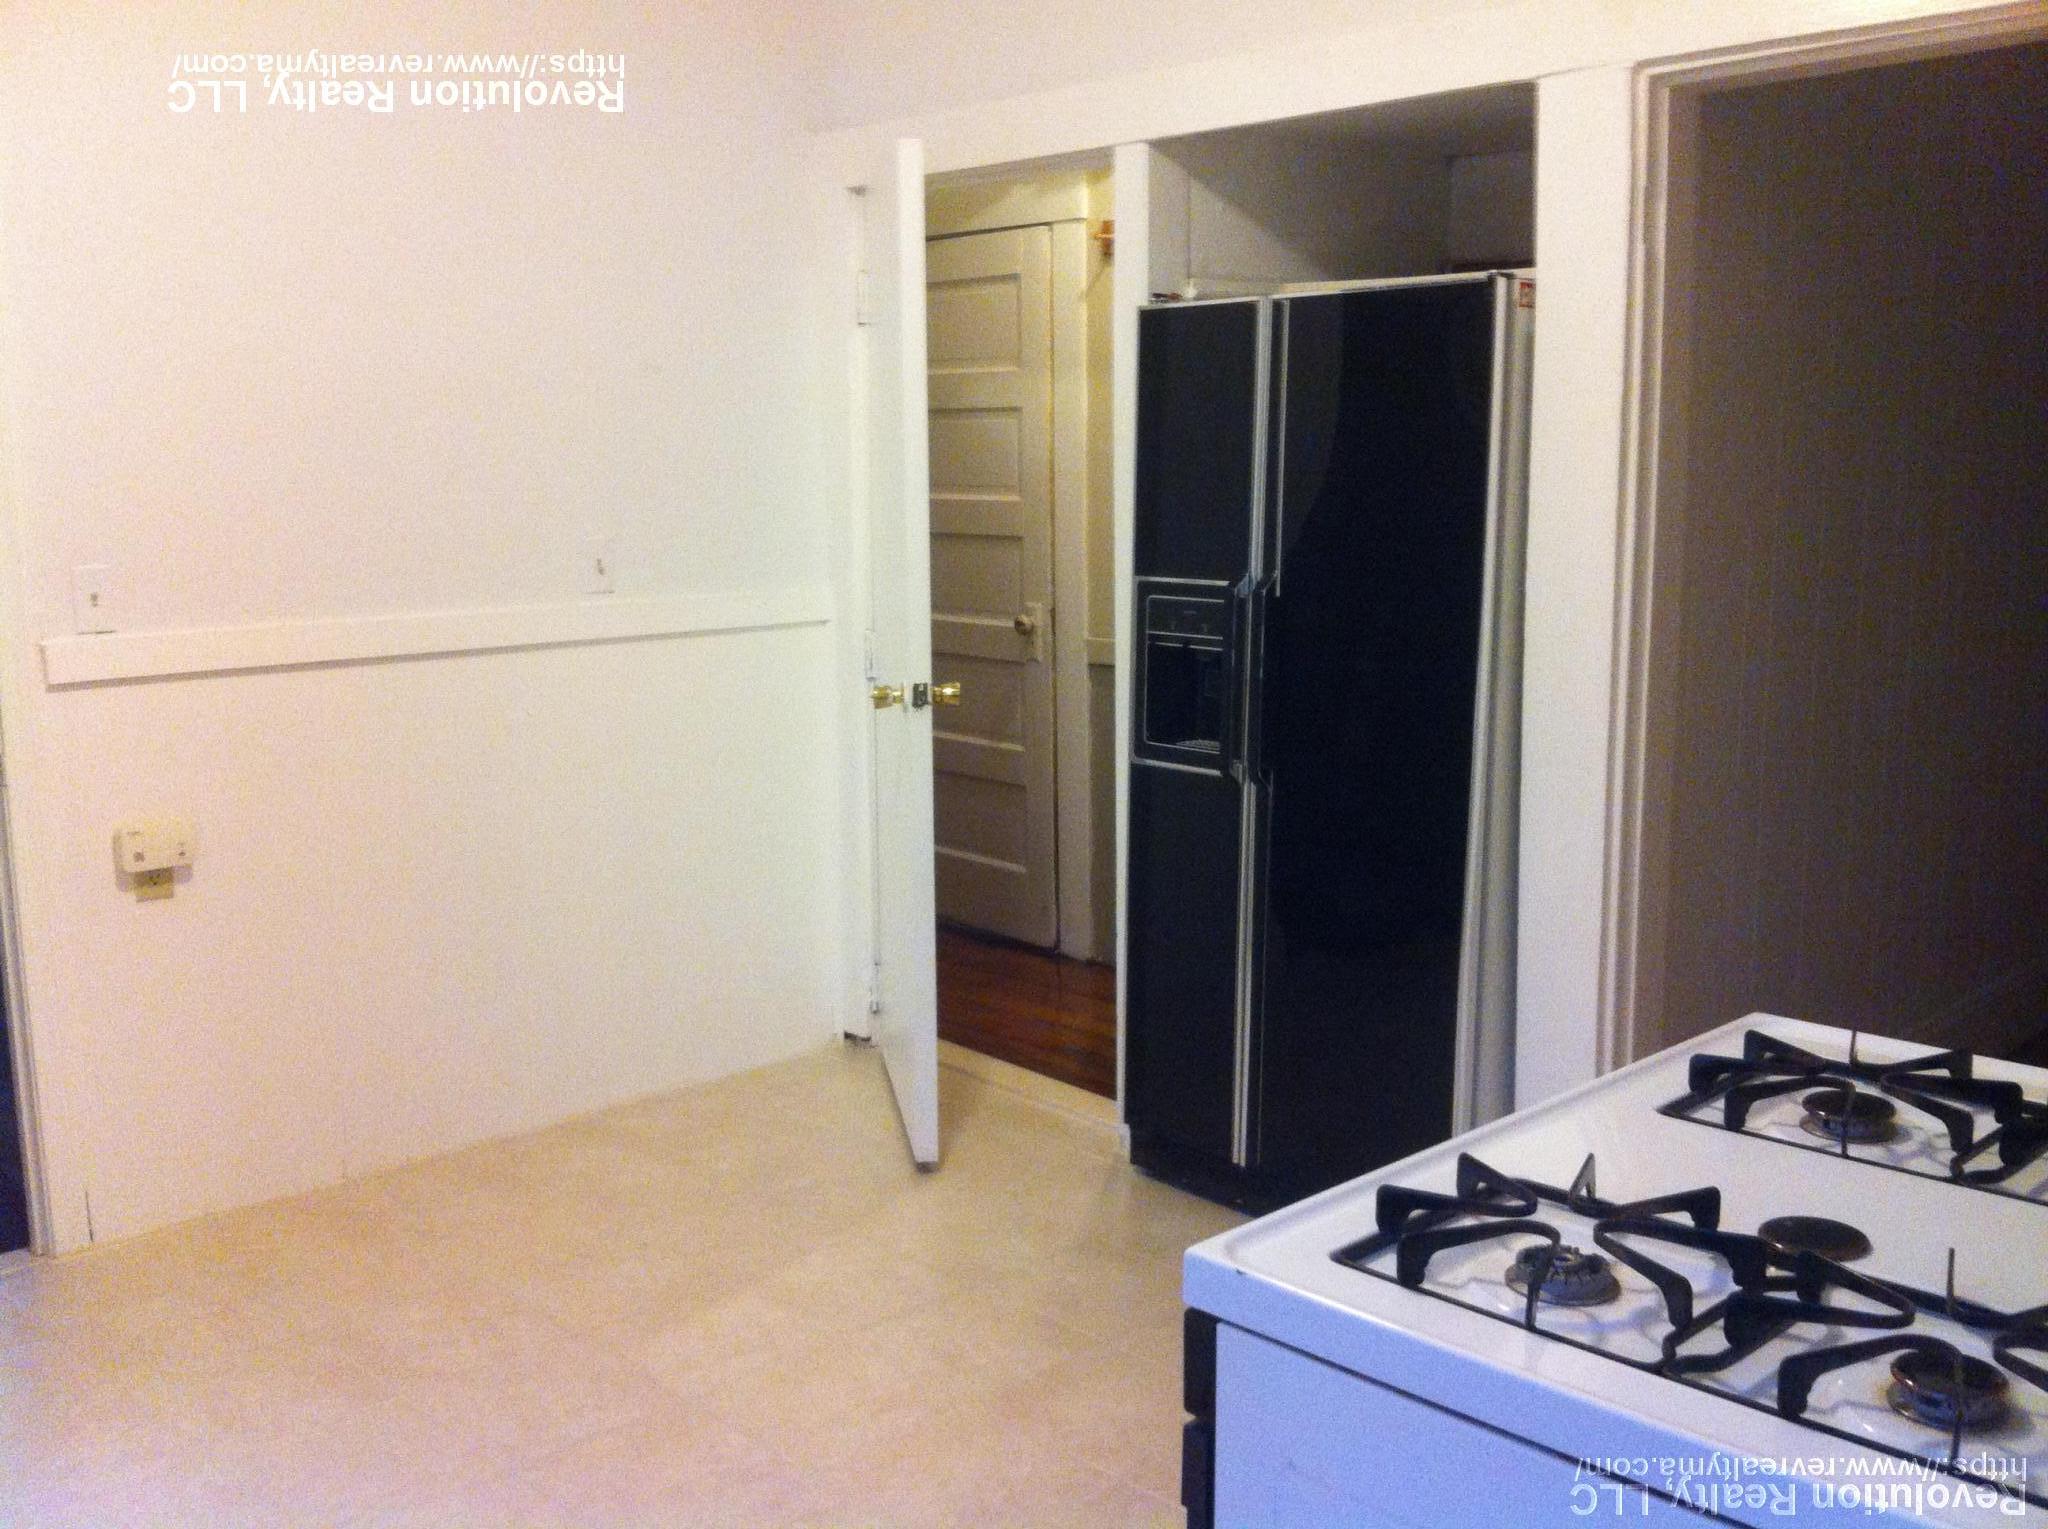 Photos of apartment on Reeds Ct.,Somerville MA 02145